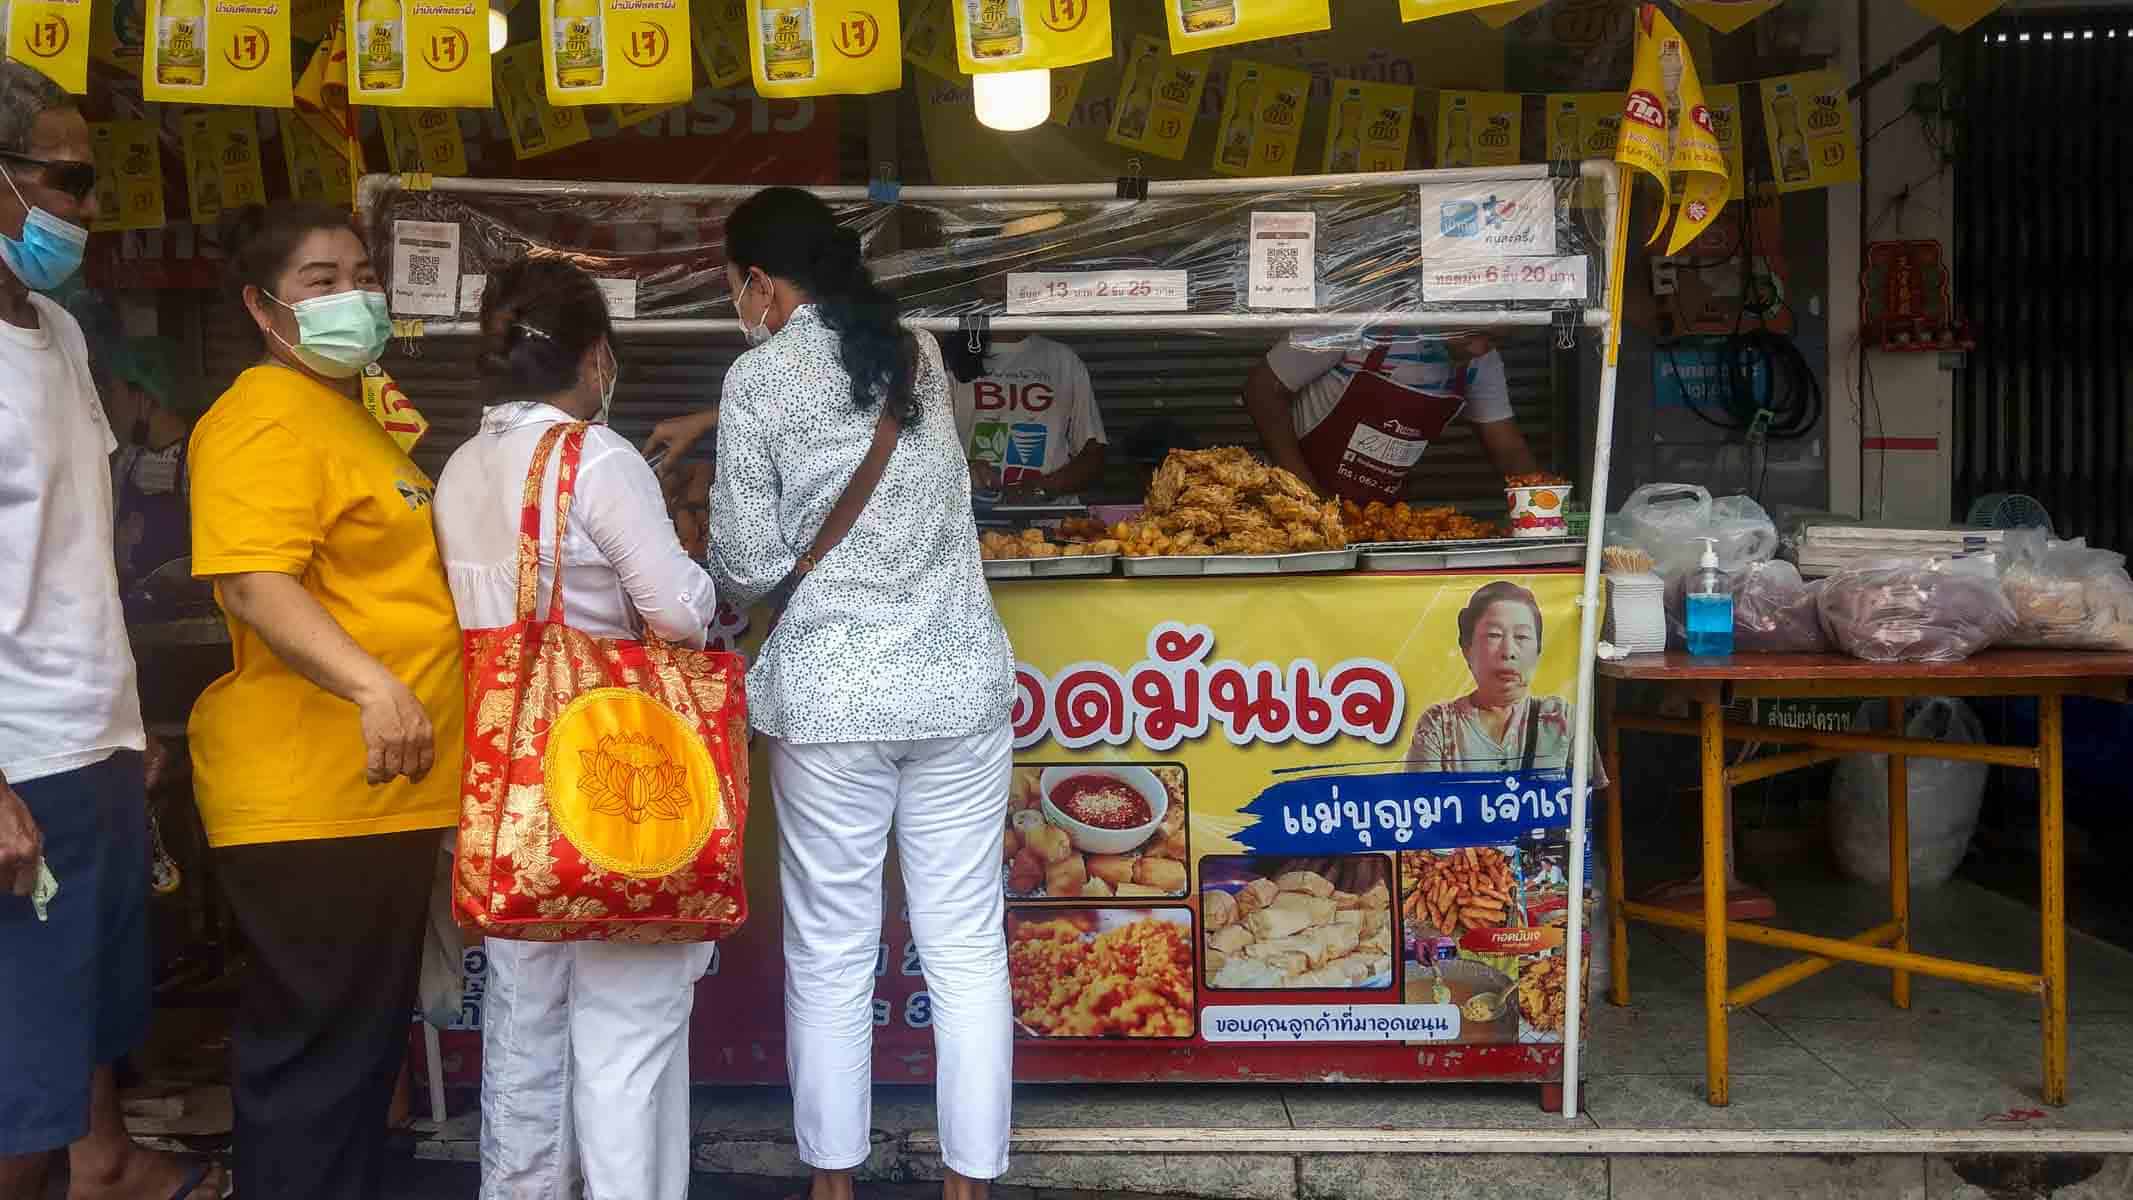 Stall selling deep fried corn cakes, tofu, and other items, with people queuing.